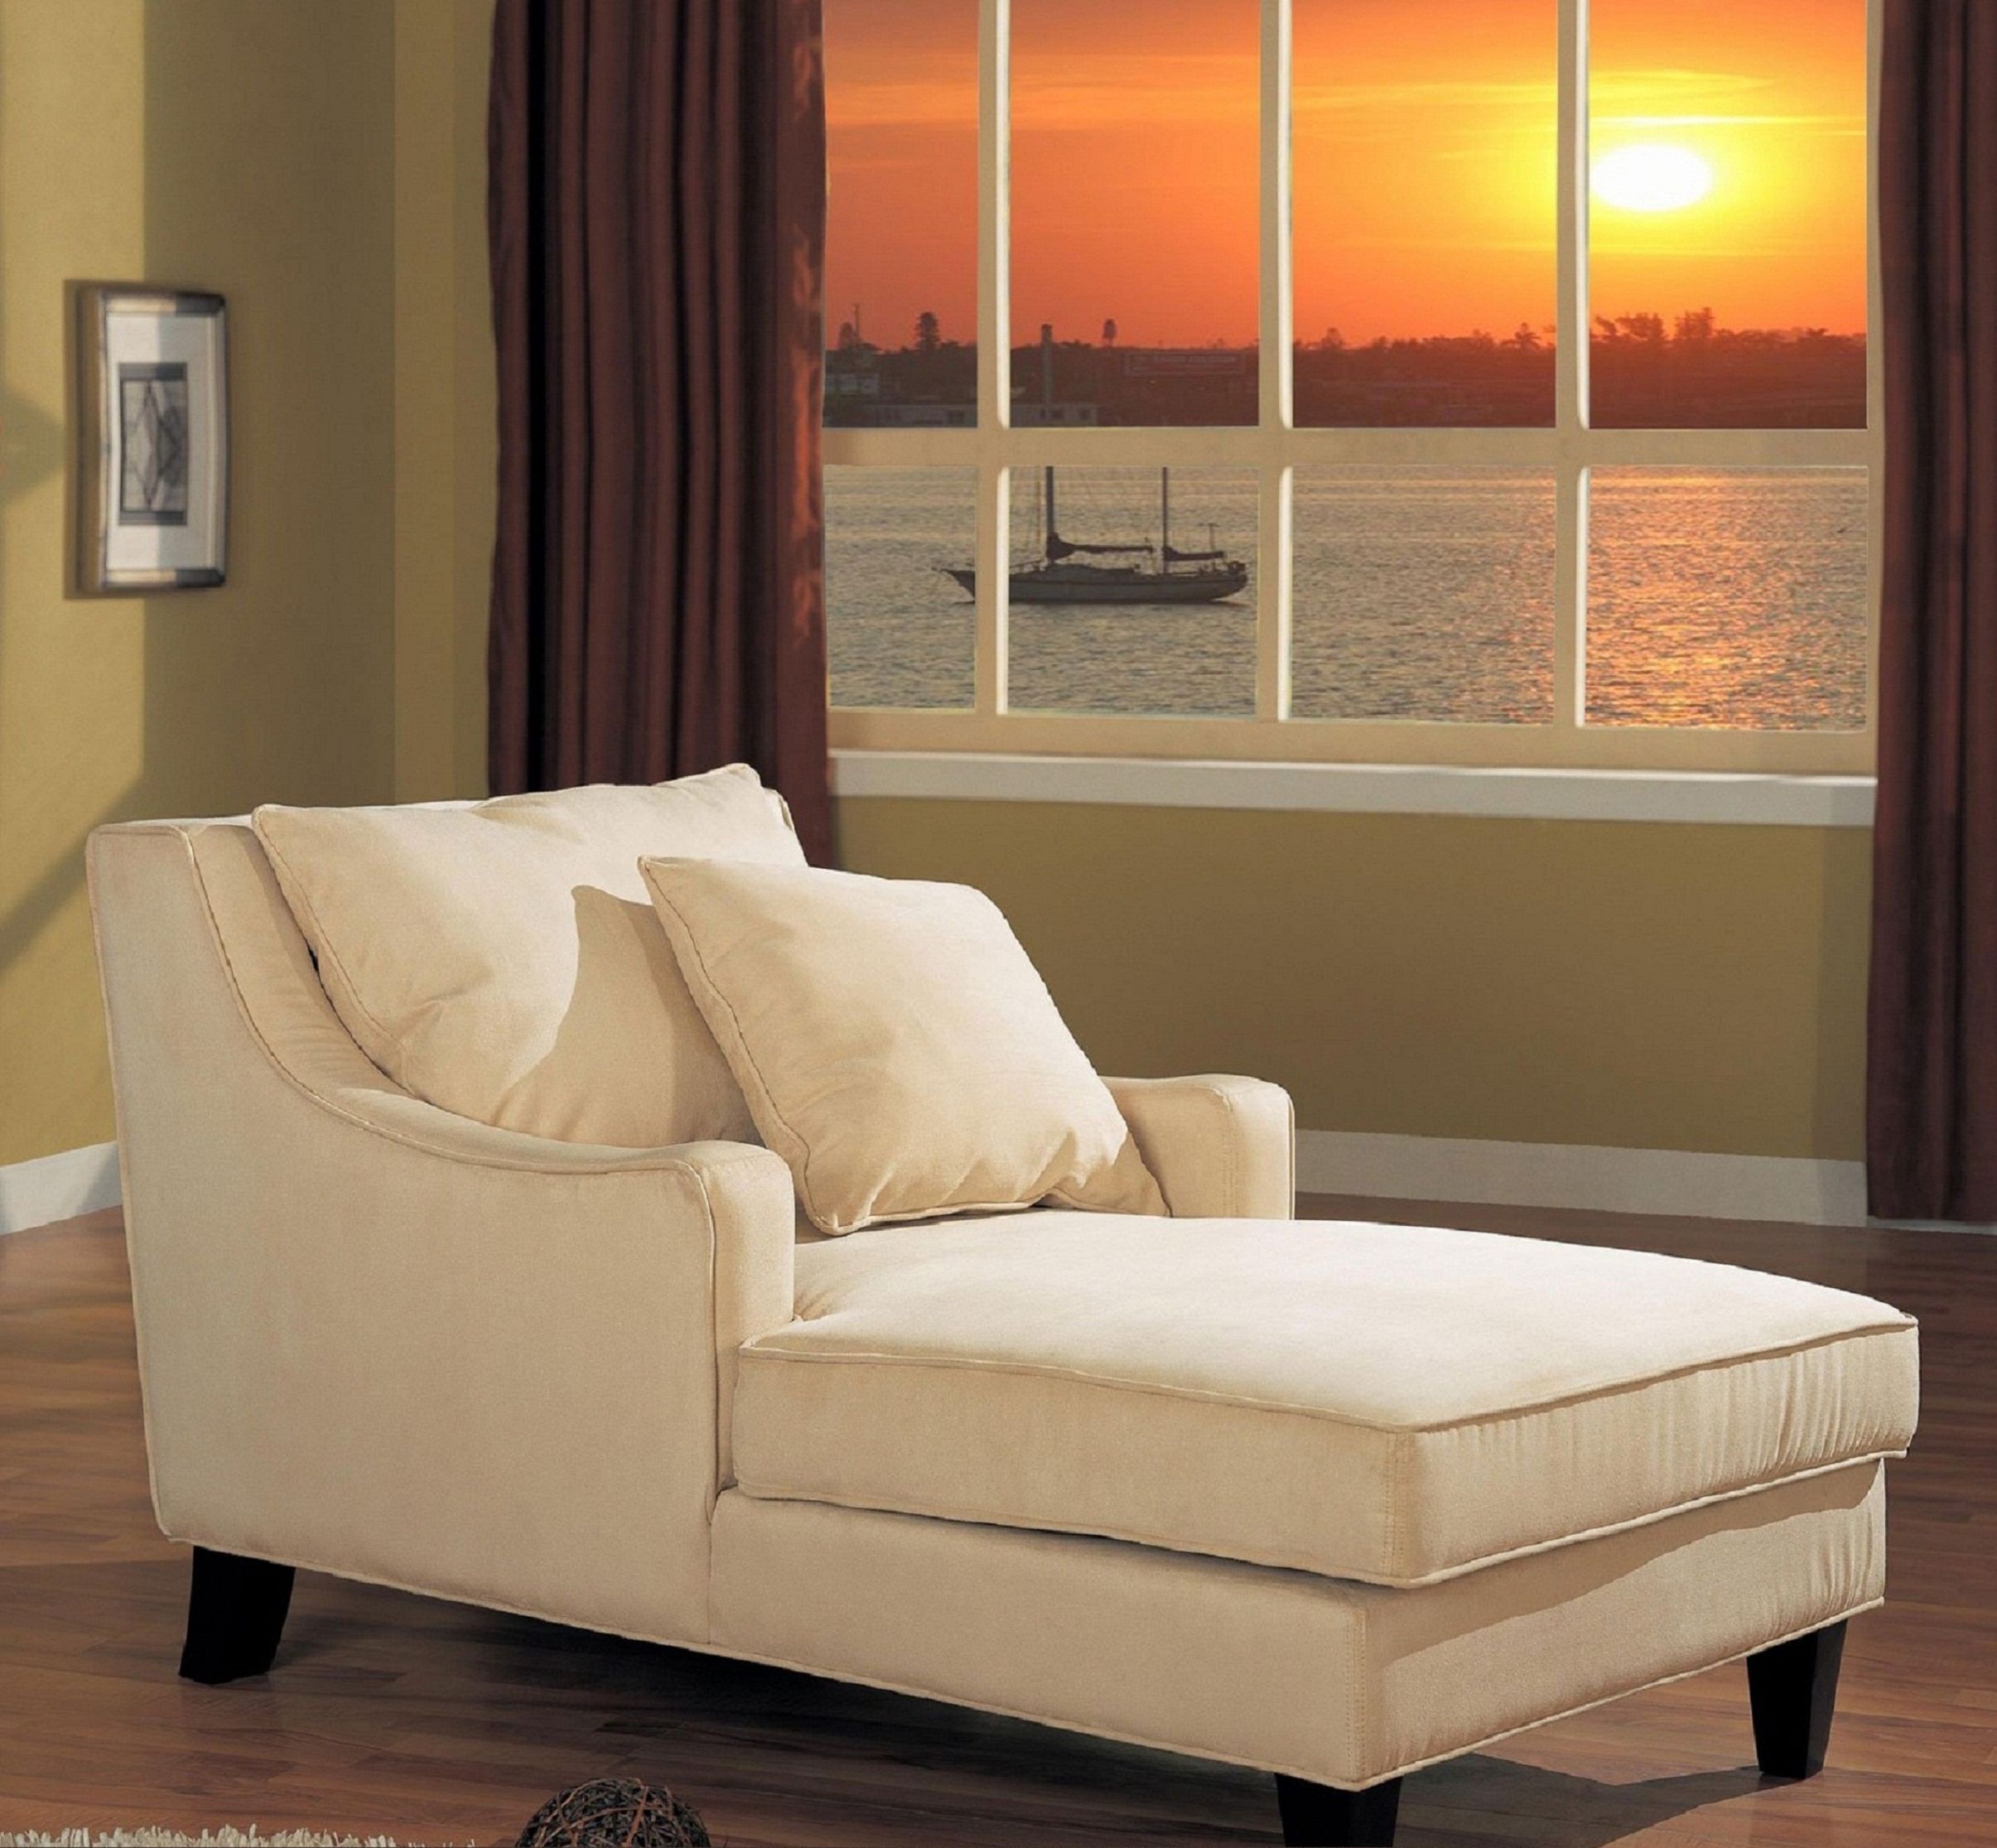 Upholstered Chaise Lounges Regarding Well Known Wide Beige Upholstered Chaise Lounge With Arm And Cushion Having (Photo 5 of 15)